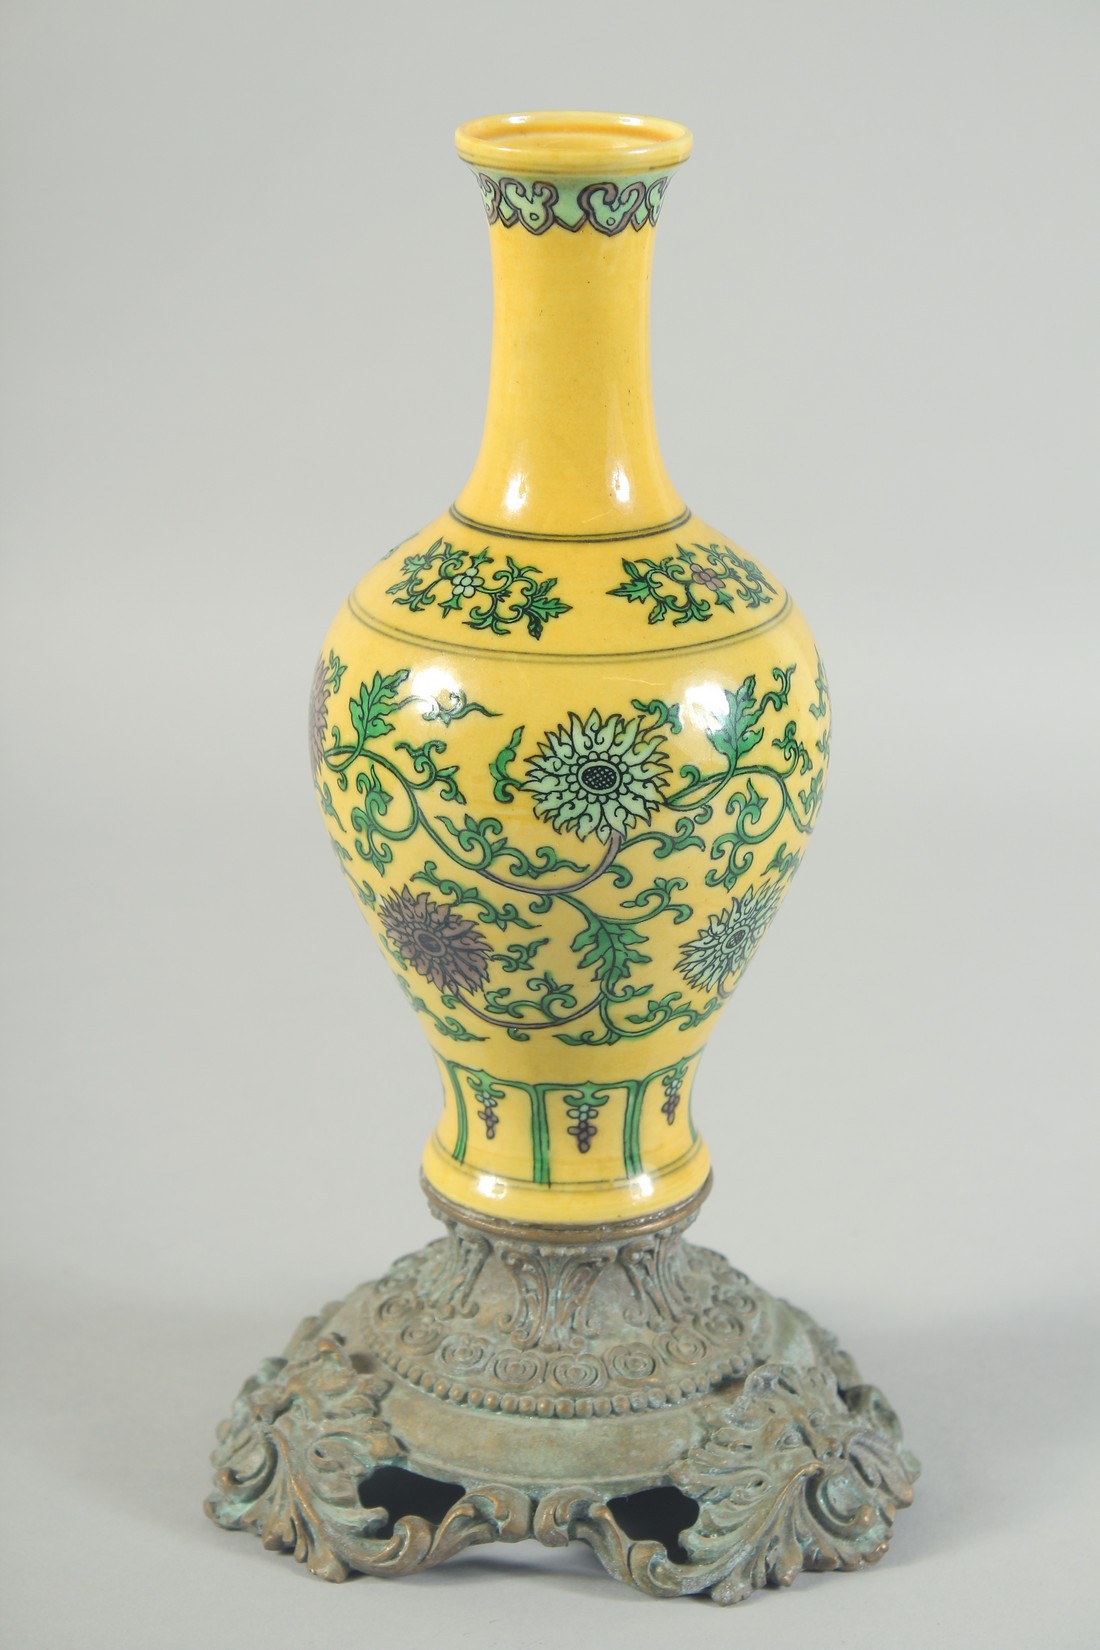 A CHINESE IMPERIAL YELLOW GROUND ENAMEL FLORAL VASE, mounted to a French bronze stand, vase base - Image 2 of 5